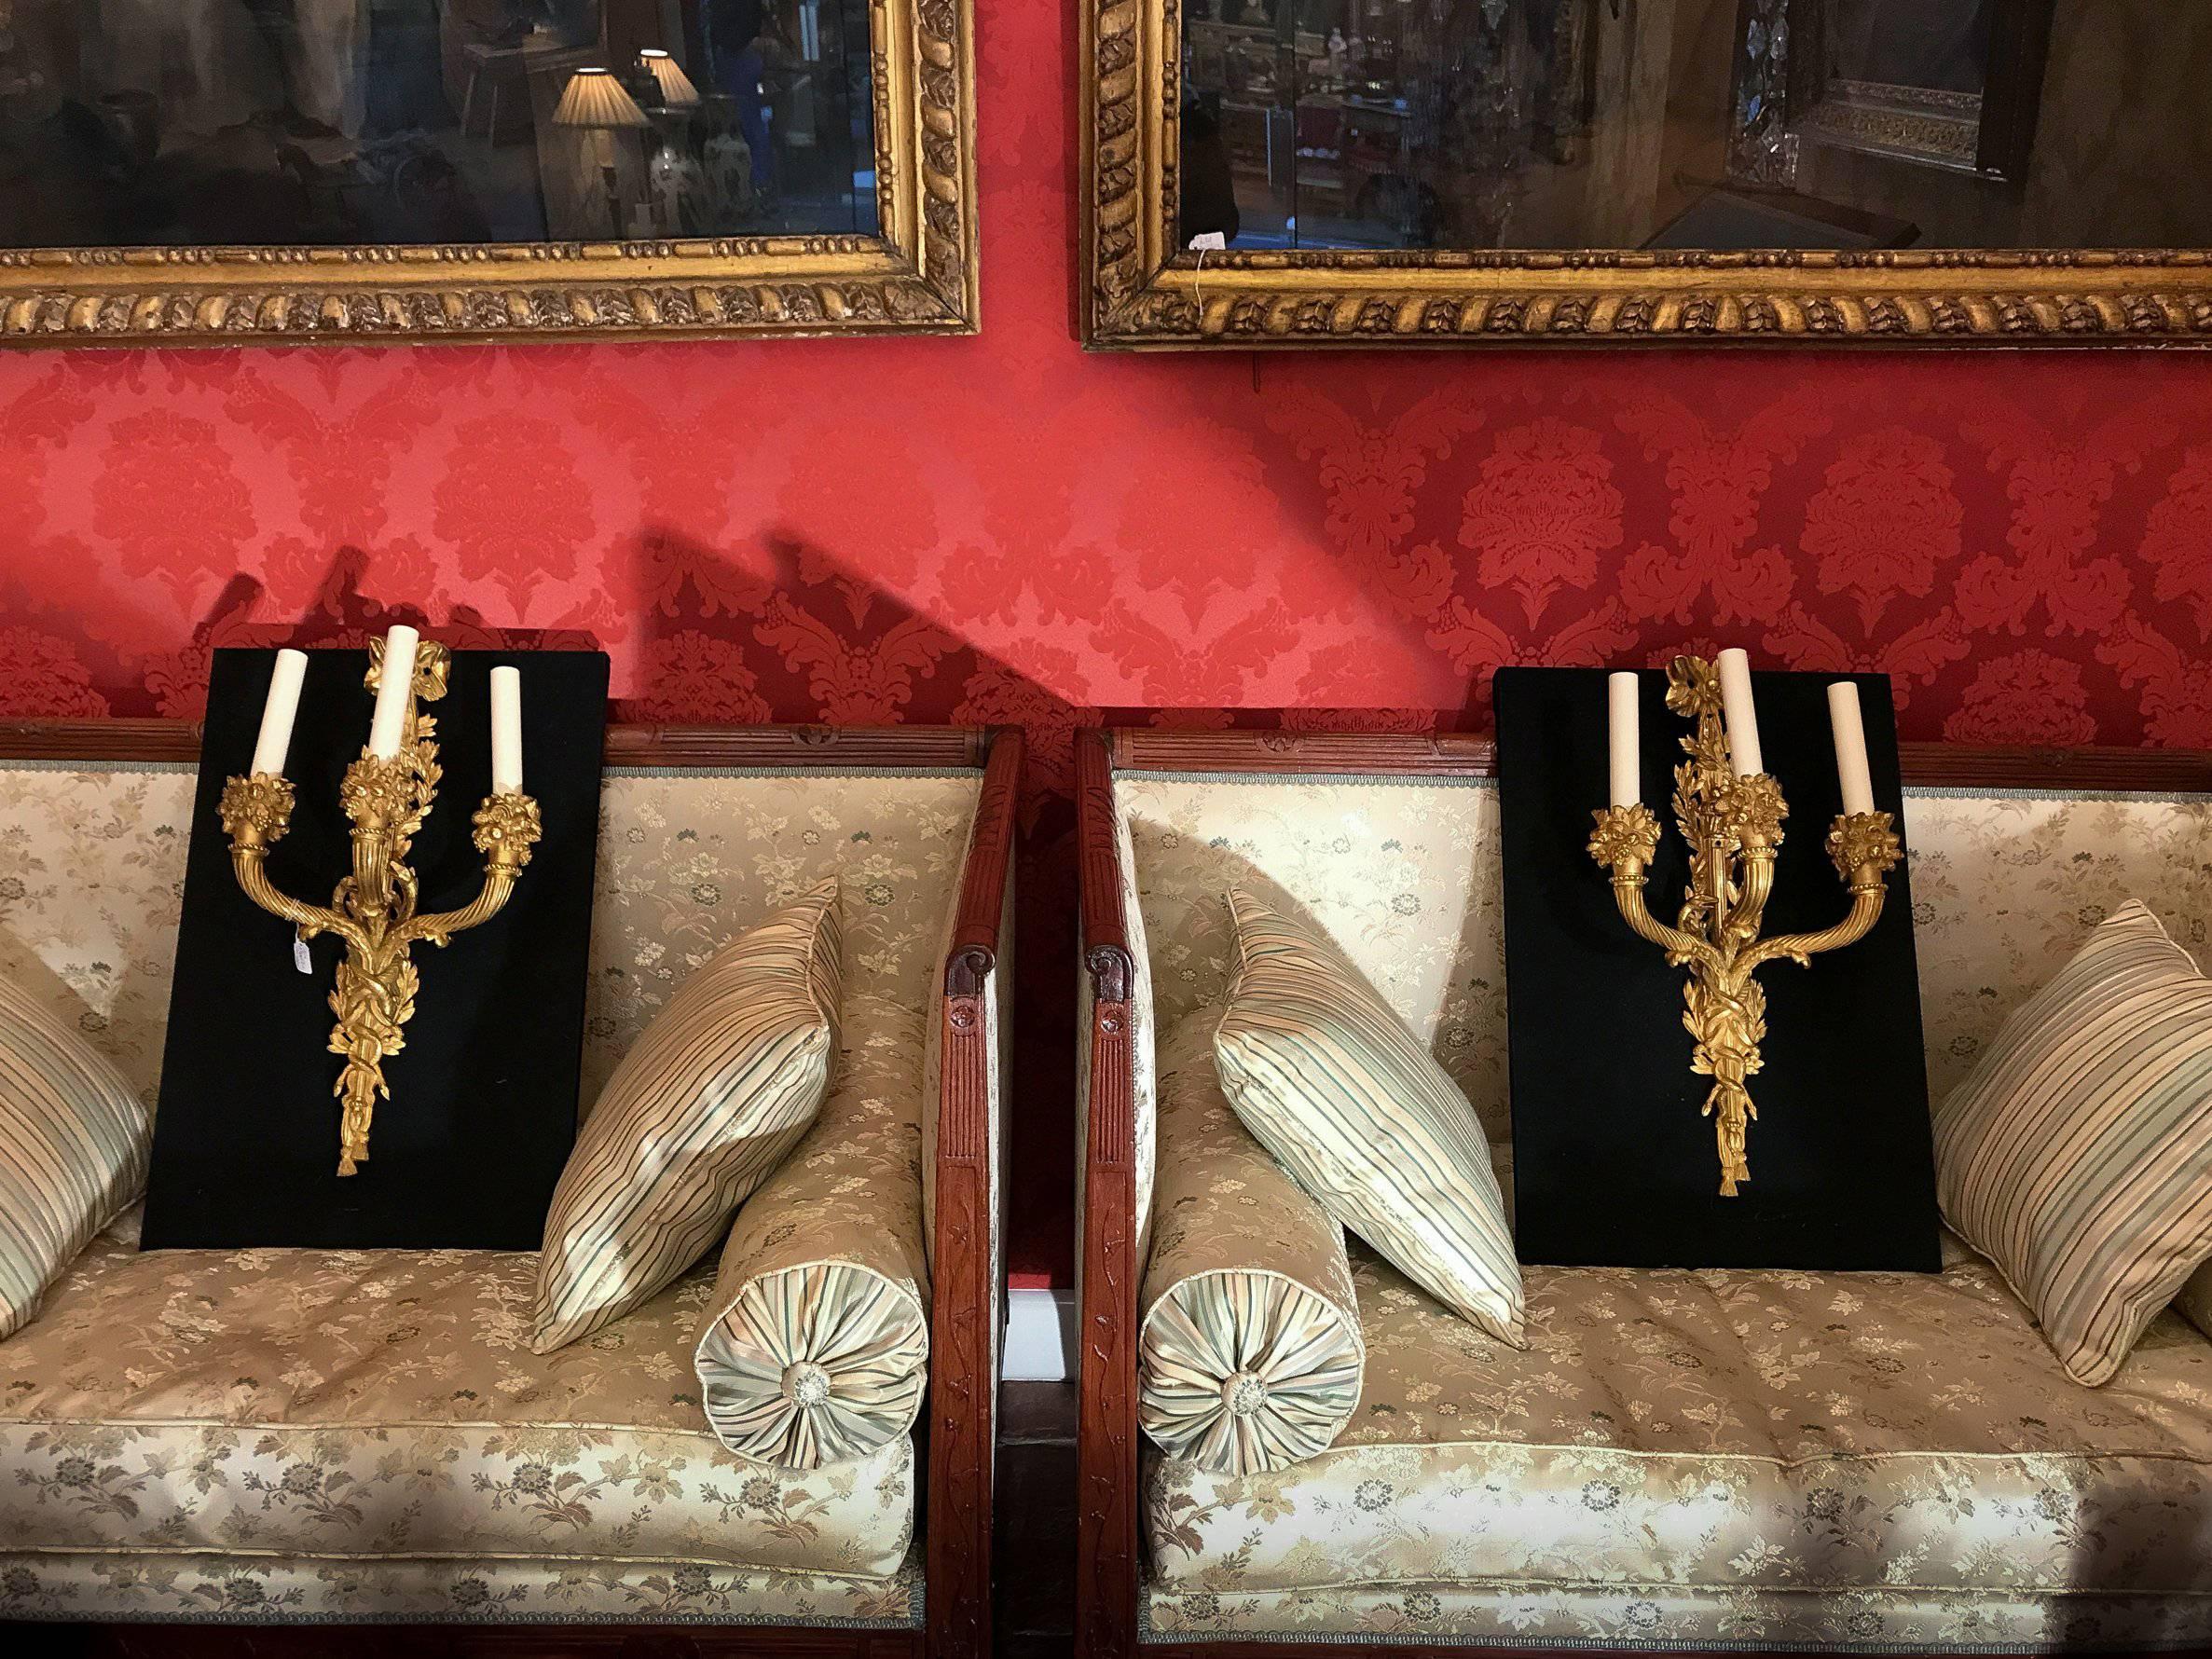 An amazing and very interesting pair of French Louis XVI style, three lights gilt-bronze sconces, chiseled of Cornucopia, flowers, and snakes.
Beautiful original gilding.

Our sconces are in perfect original condition. It has been professionally